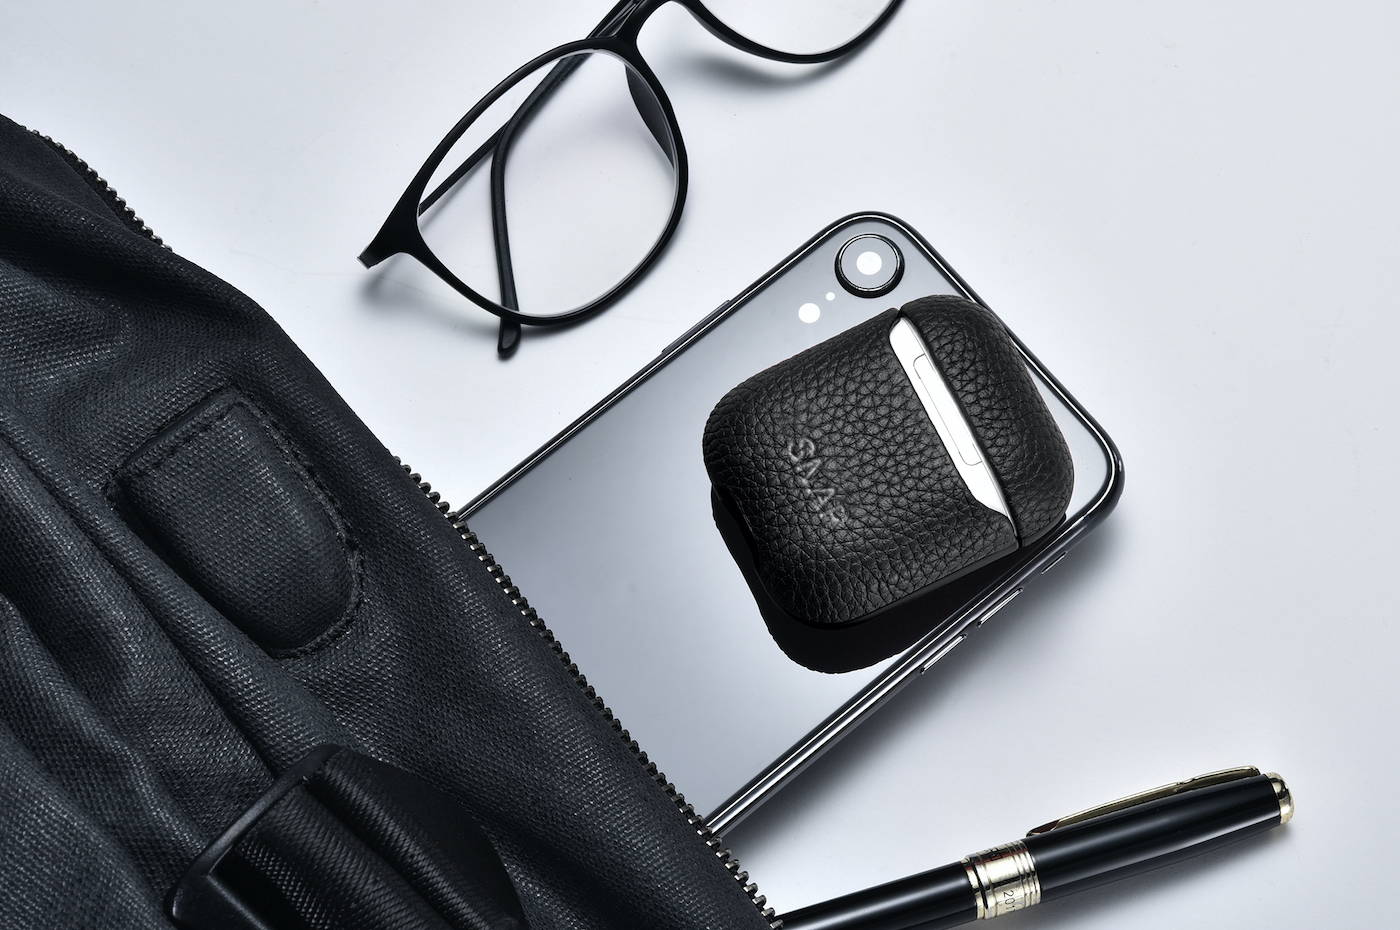 Black genuine leather airpods laying on iphone that is being compact into a bag